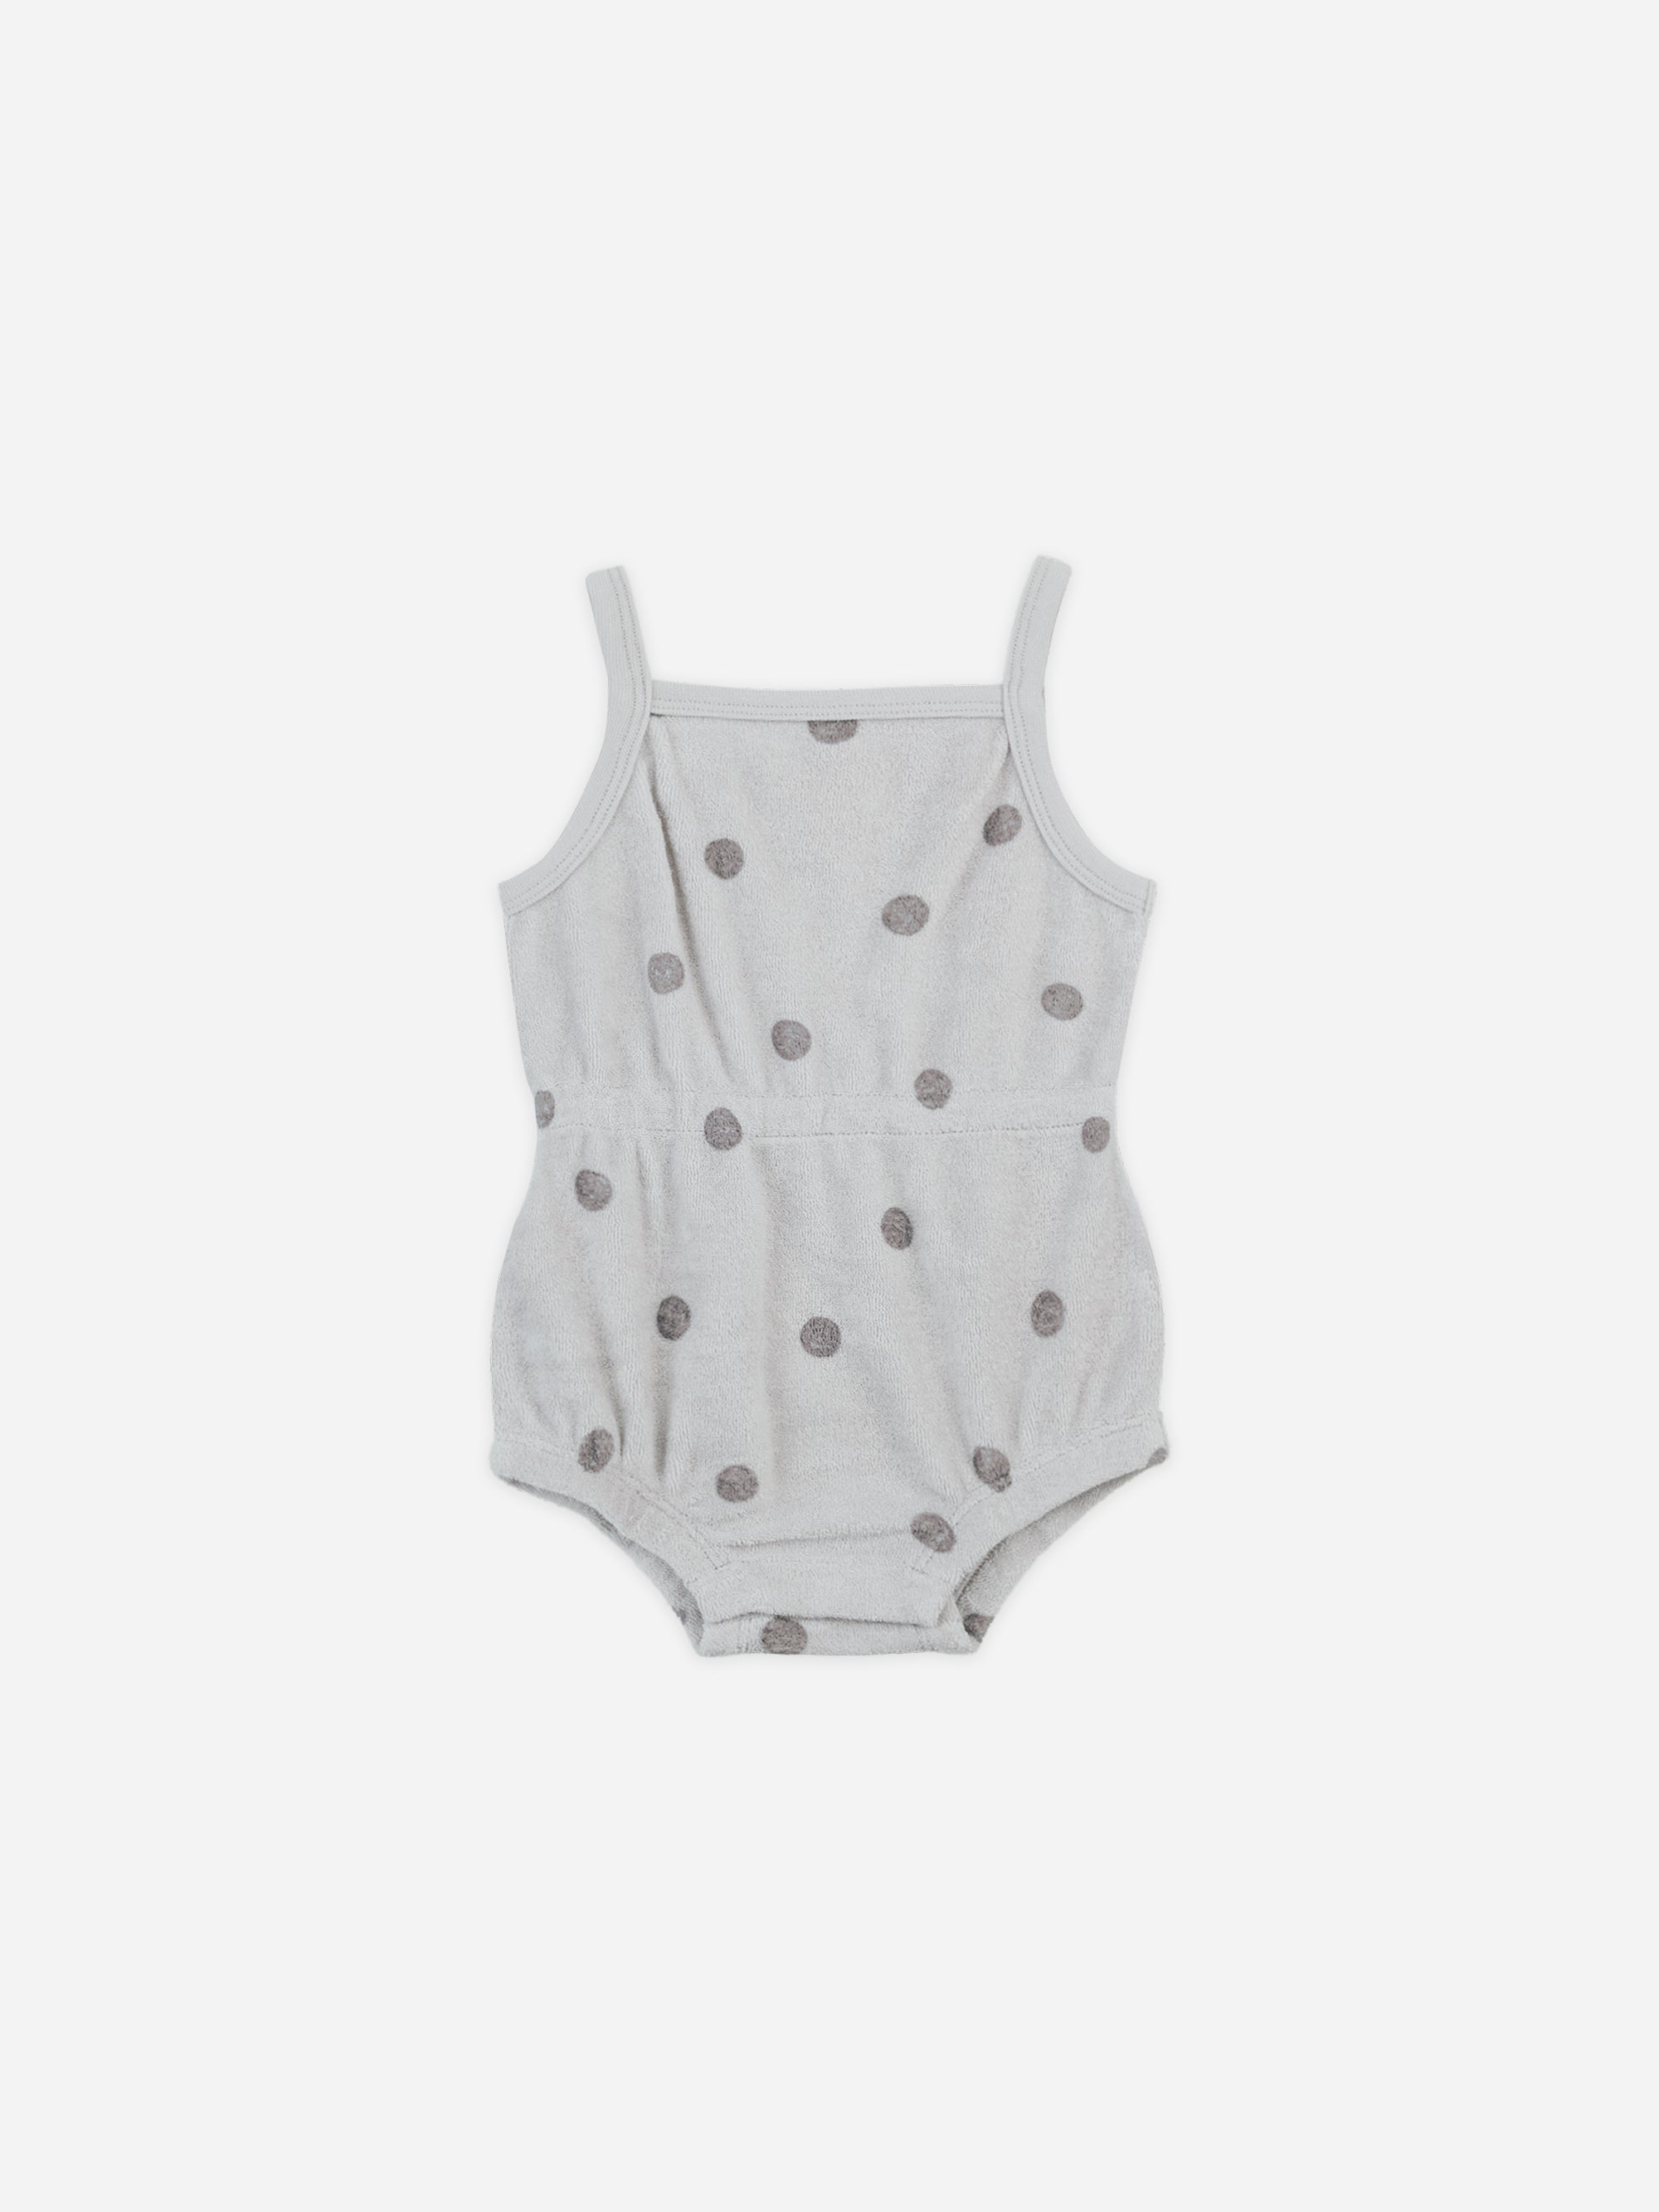 Terry Cinch Romper || Polka Dot - Rylee + Cru | Kids Clothes | Trendy Baby Clothes | Modern Infant Outfits |